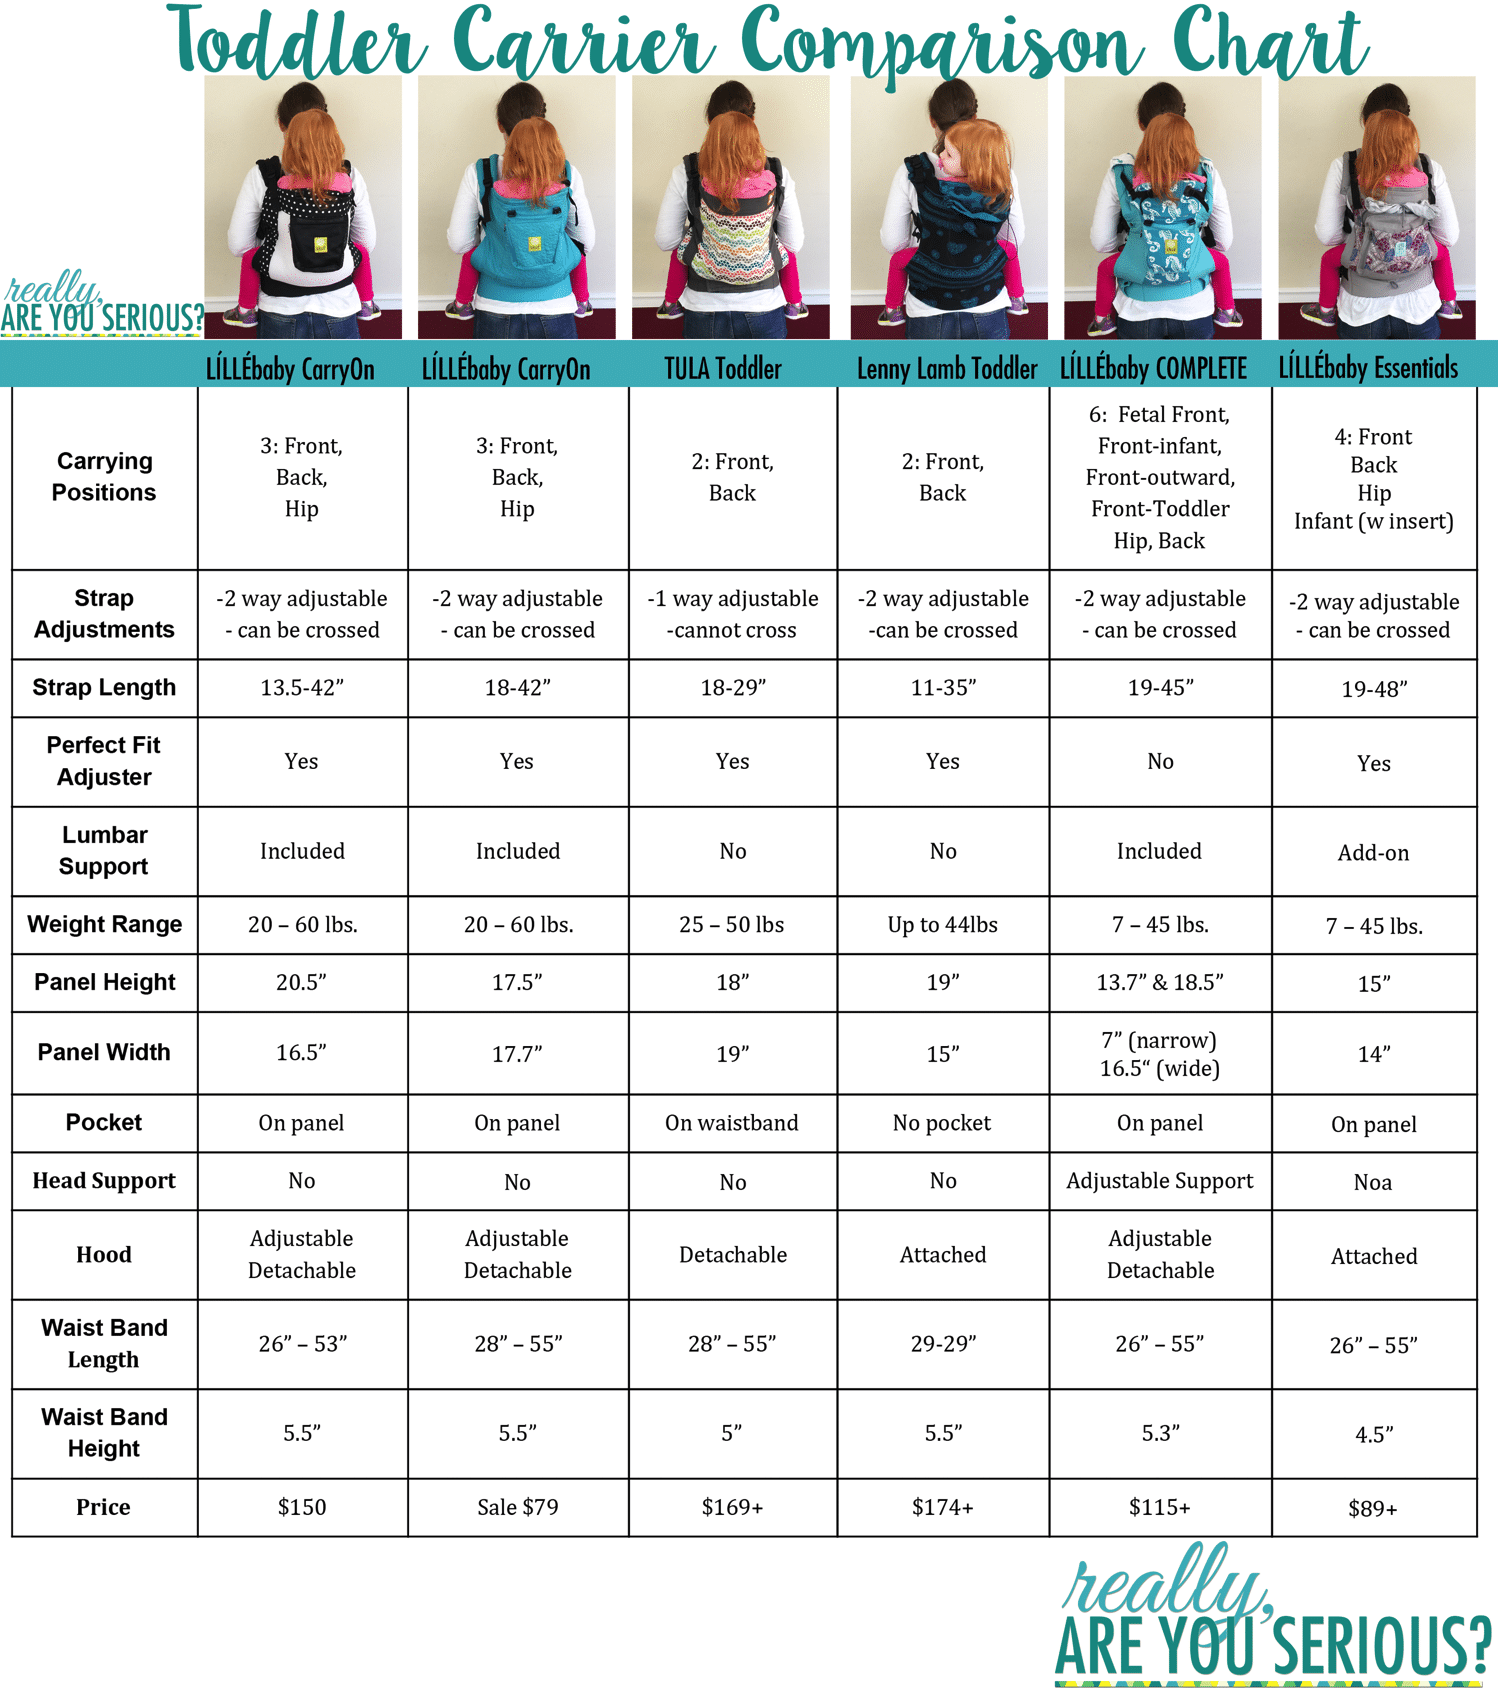 Toddler in carrier comparison with chart